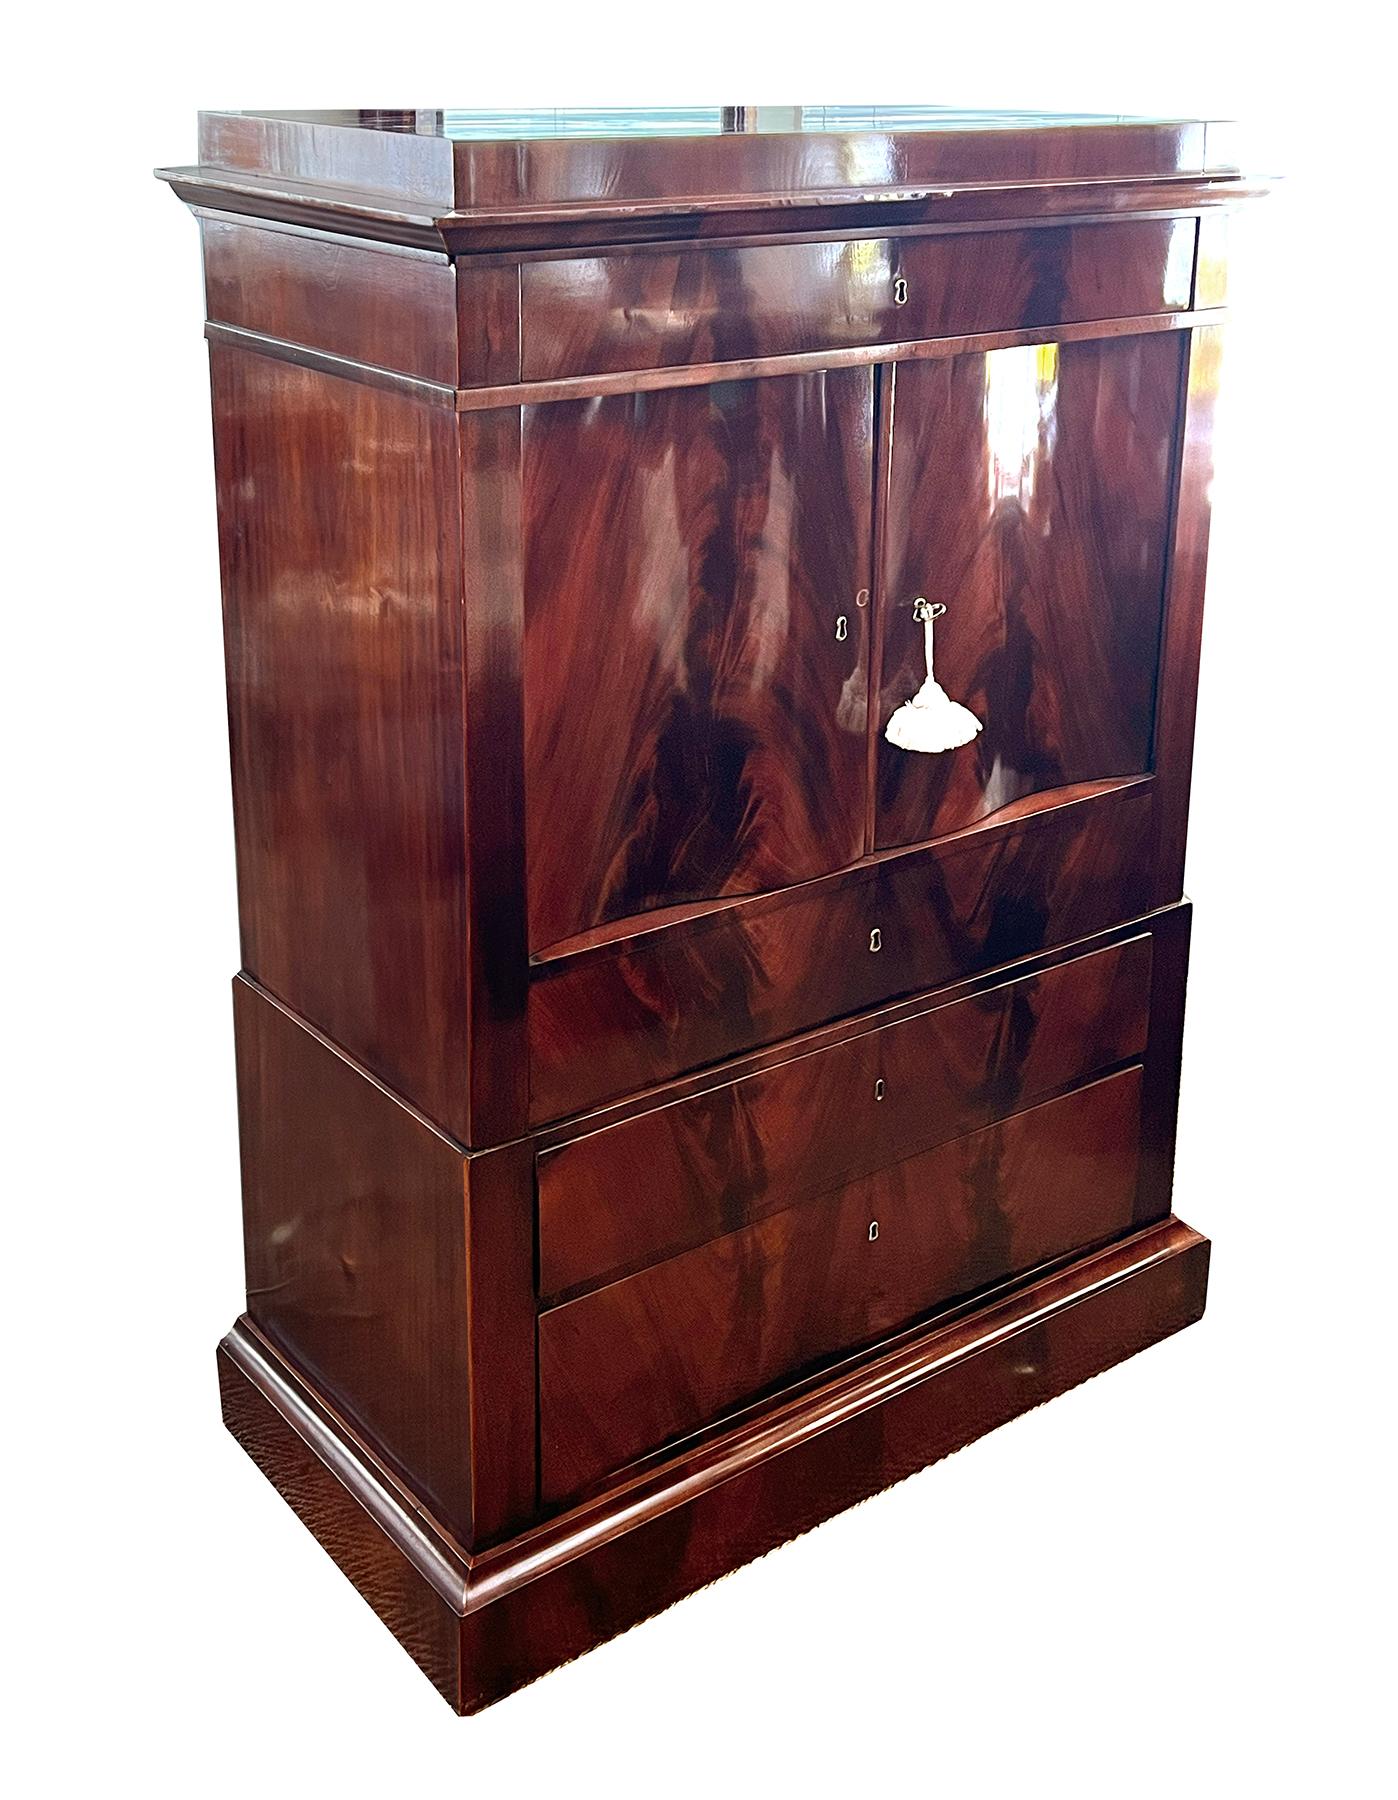 Danish Empire Tall Chest of Drawers in Book-Matched Flame Mahogany Veneer For Sale 4